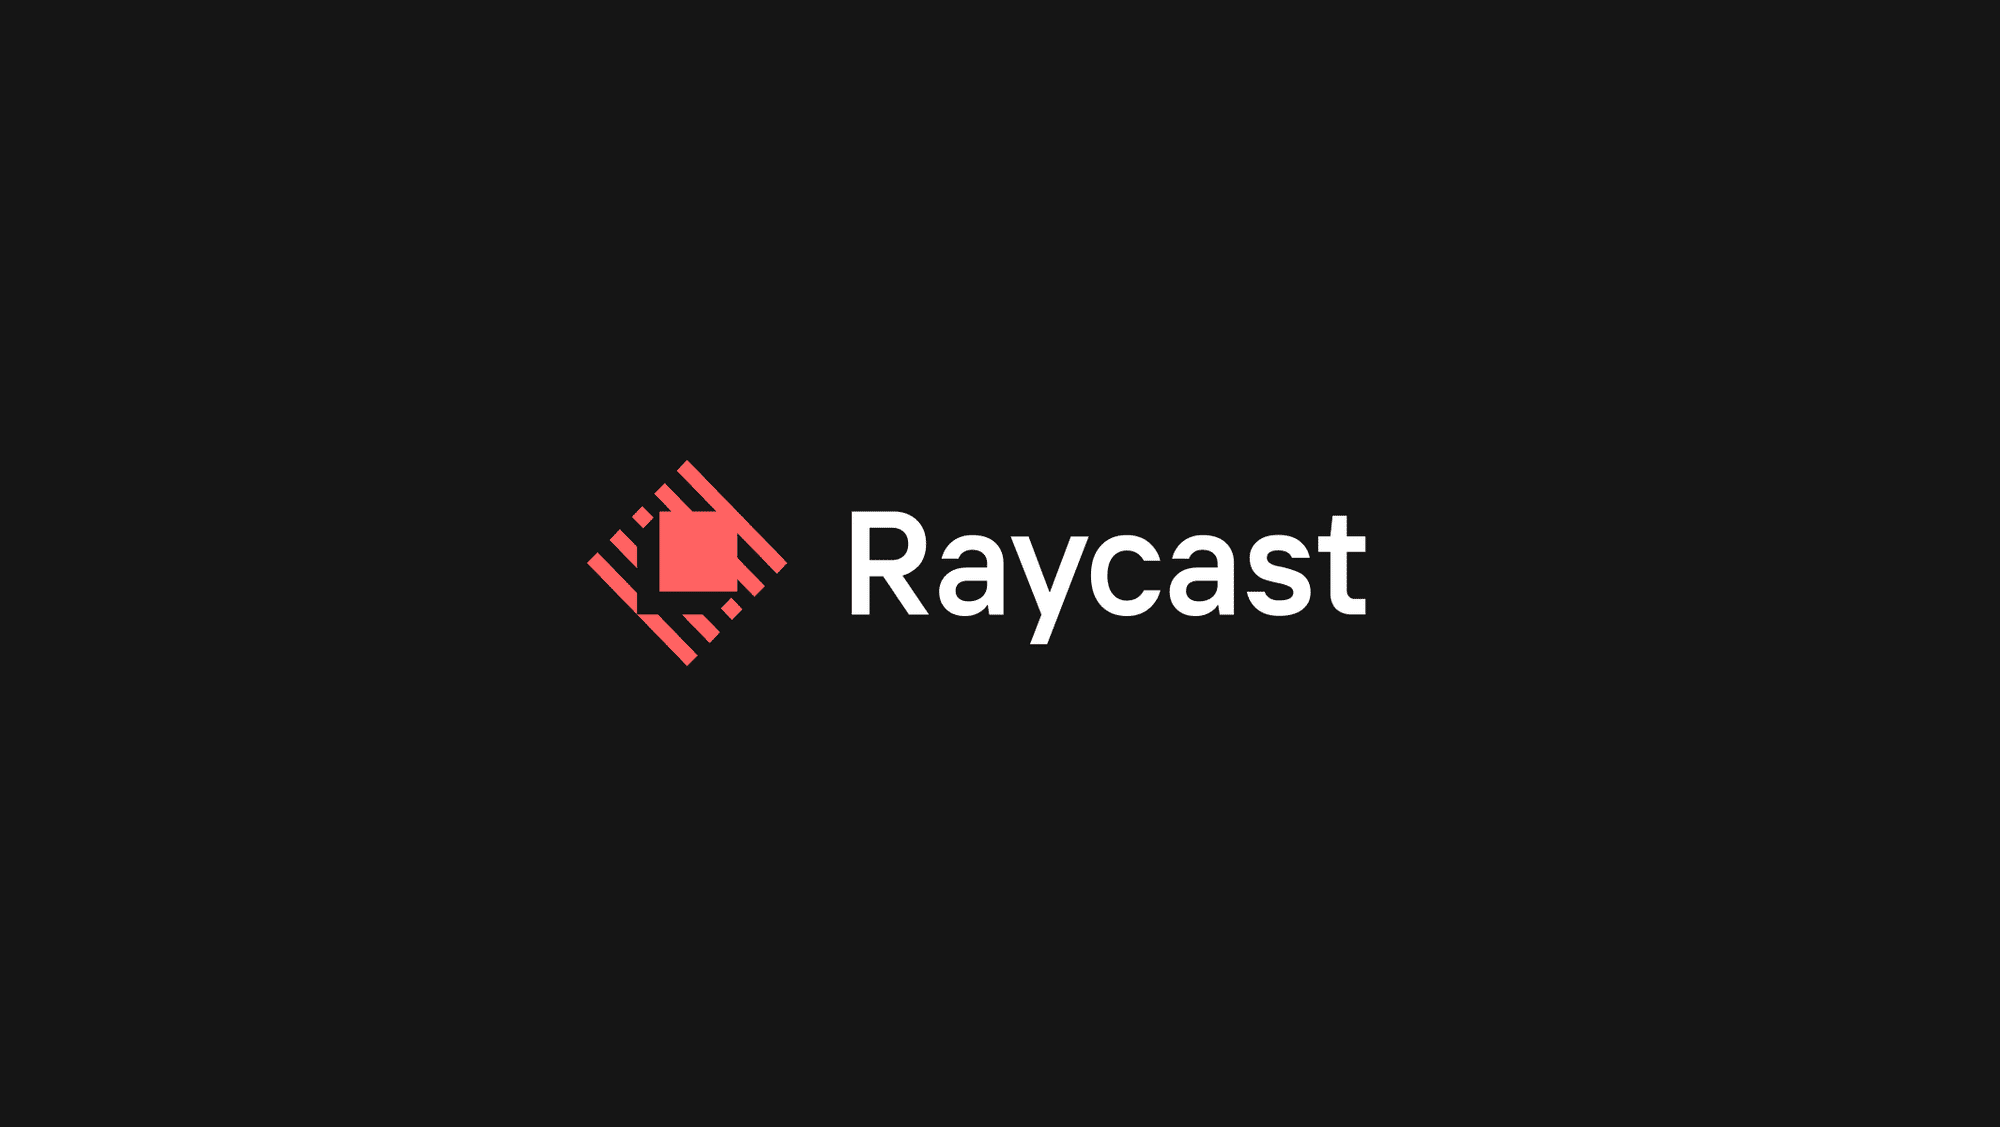 Build an Apple Music to Spotify Converter for Raycast